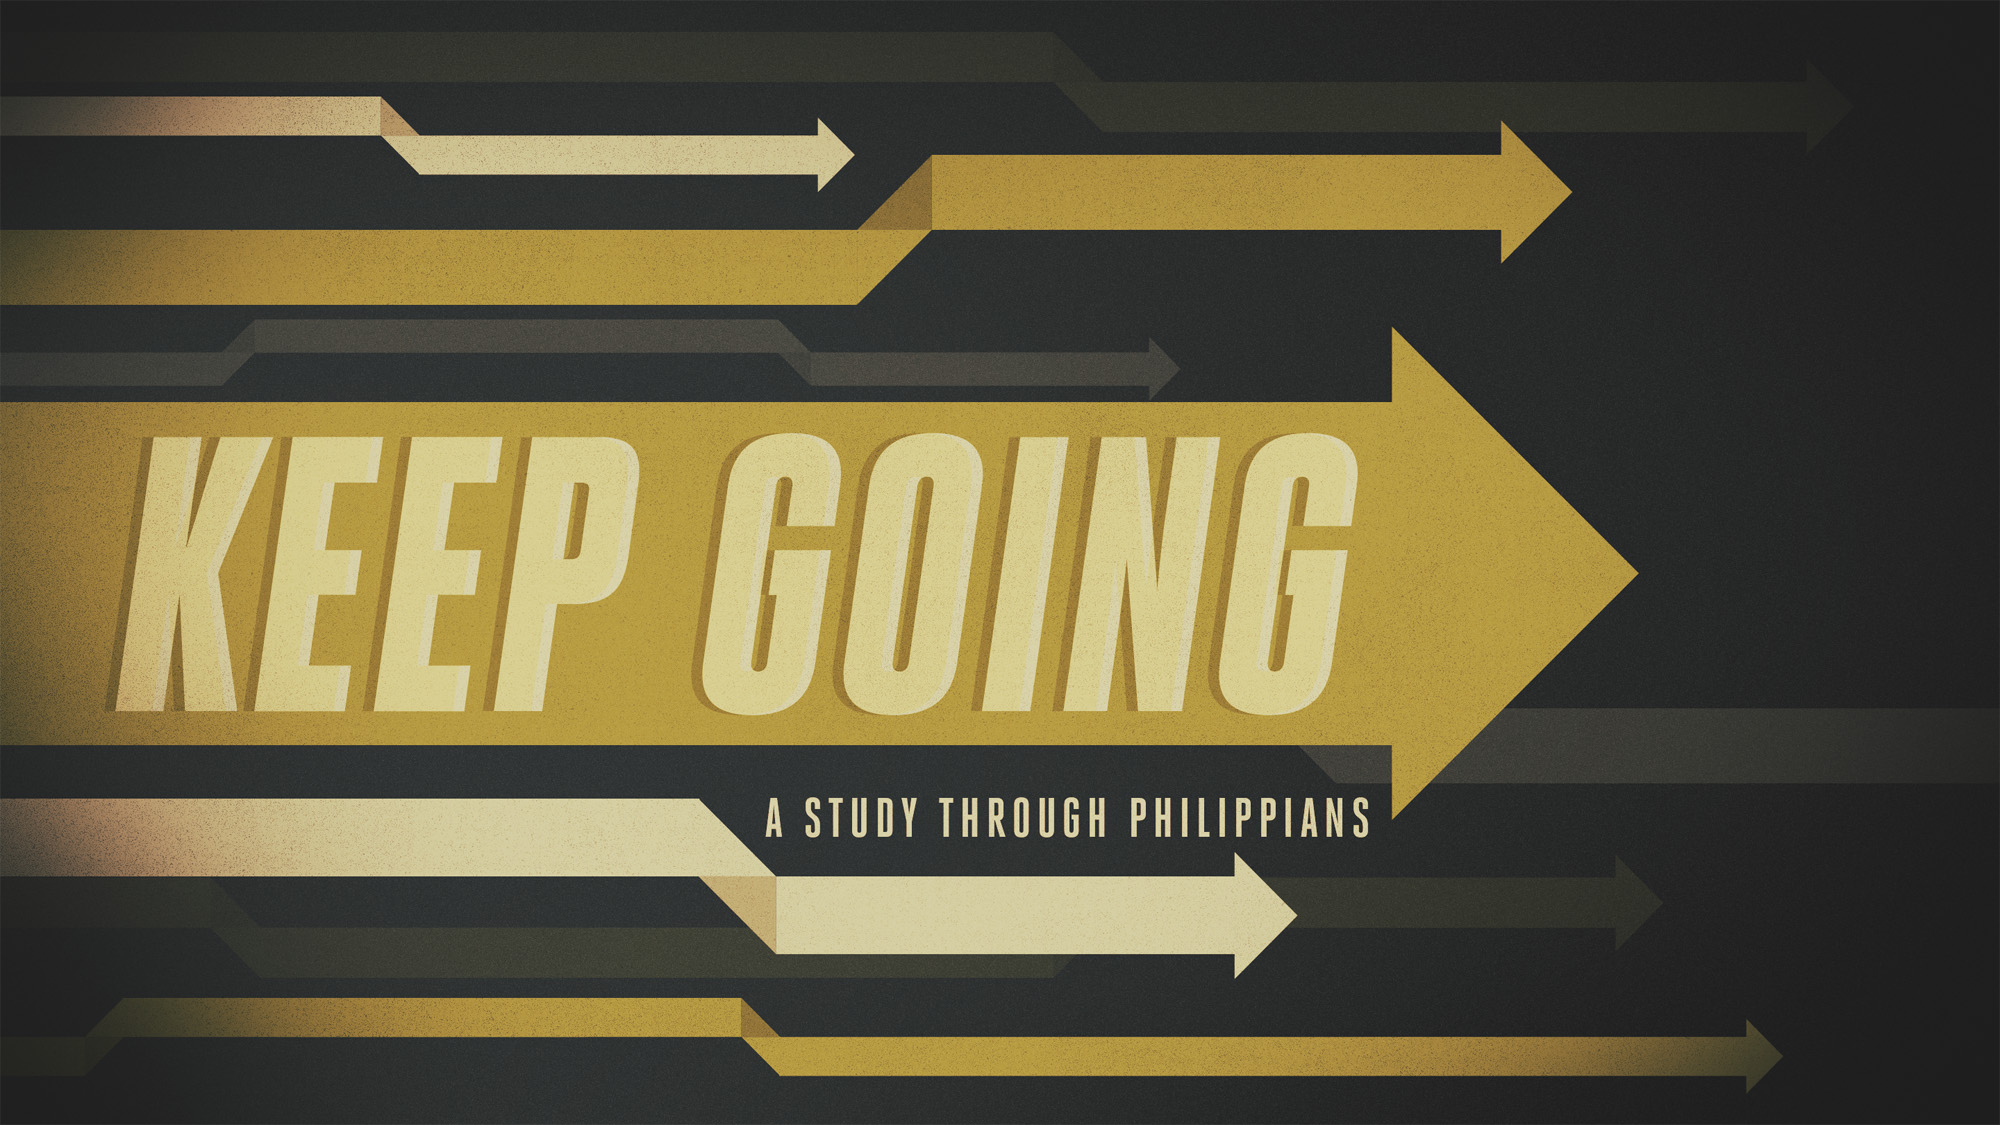 05-07-17 | Keep Going | The Joy of Pressure | Mark Anderson